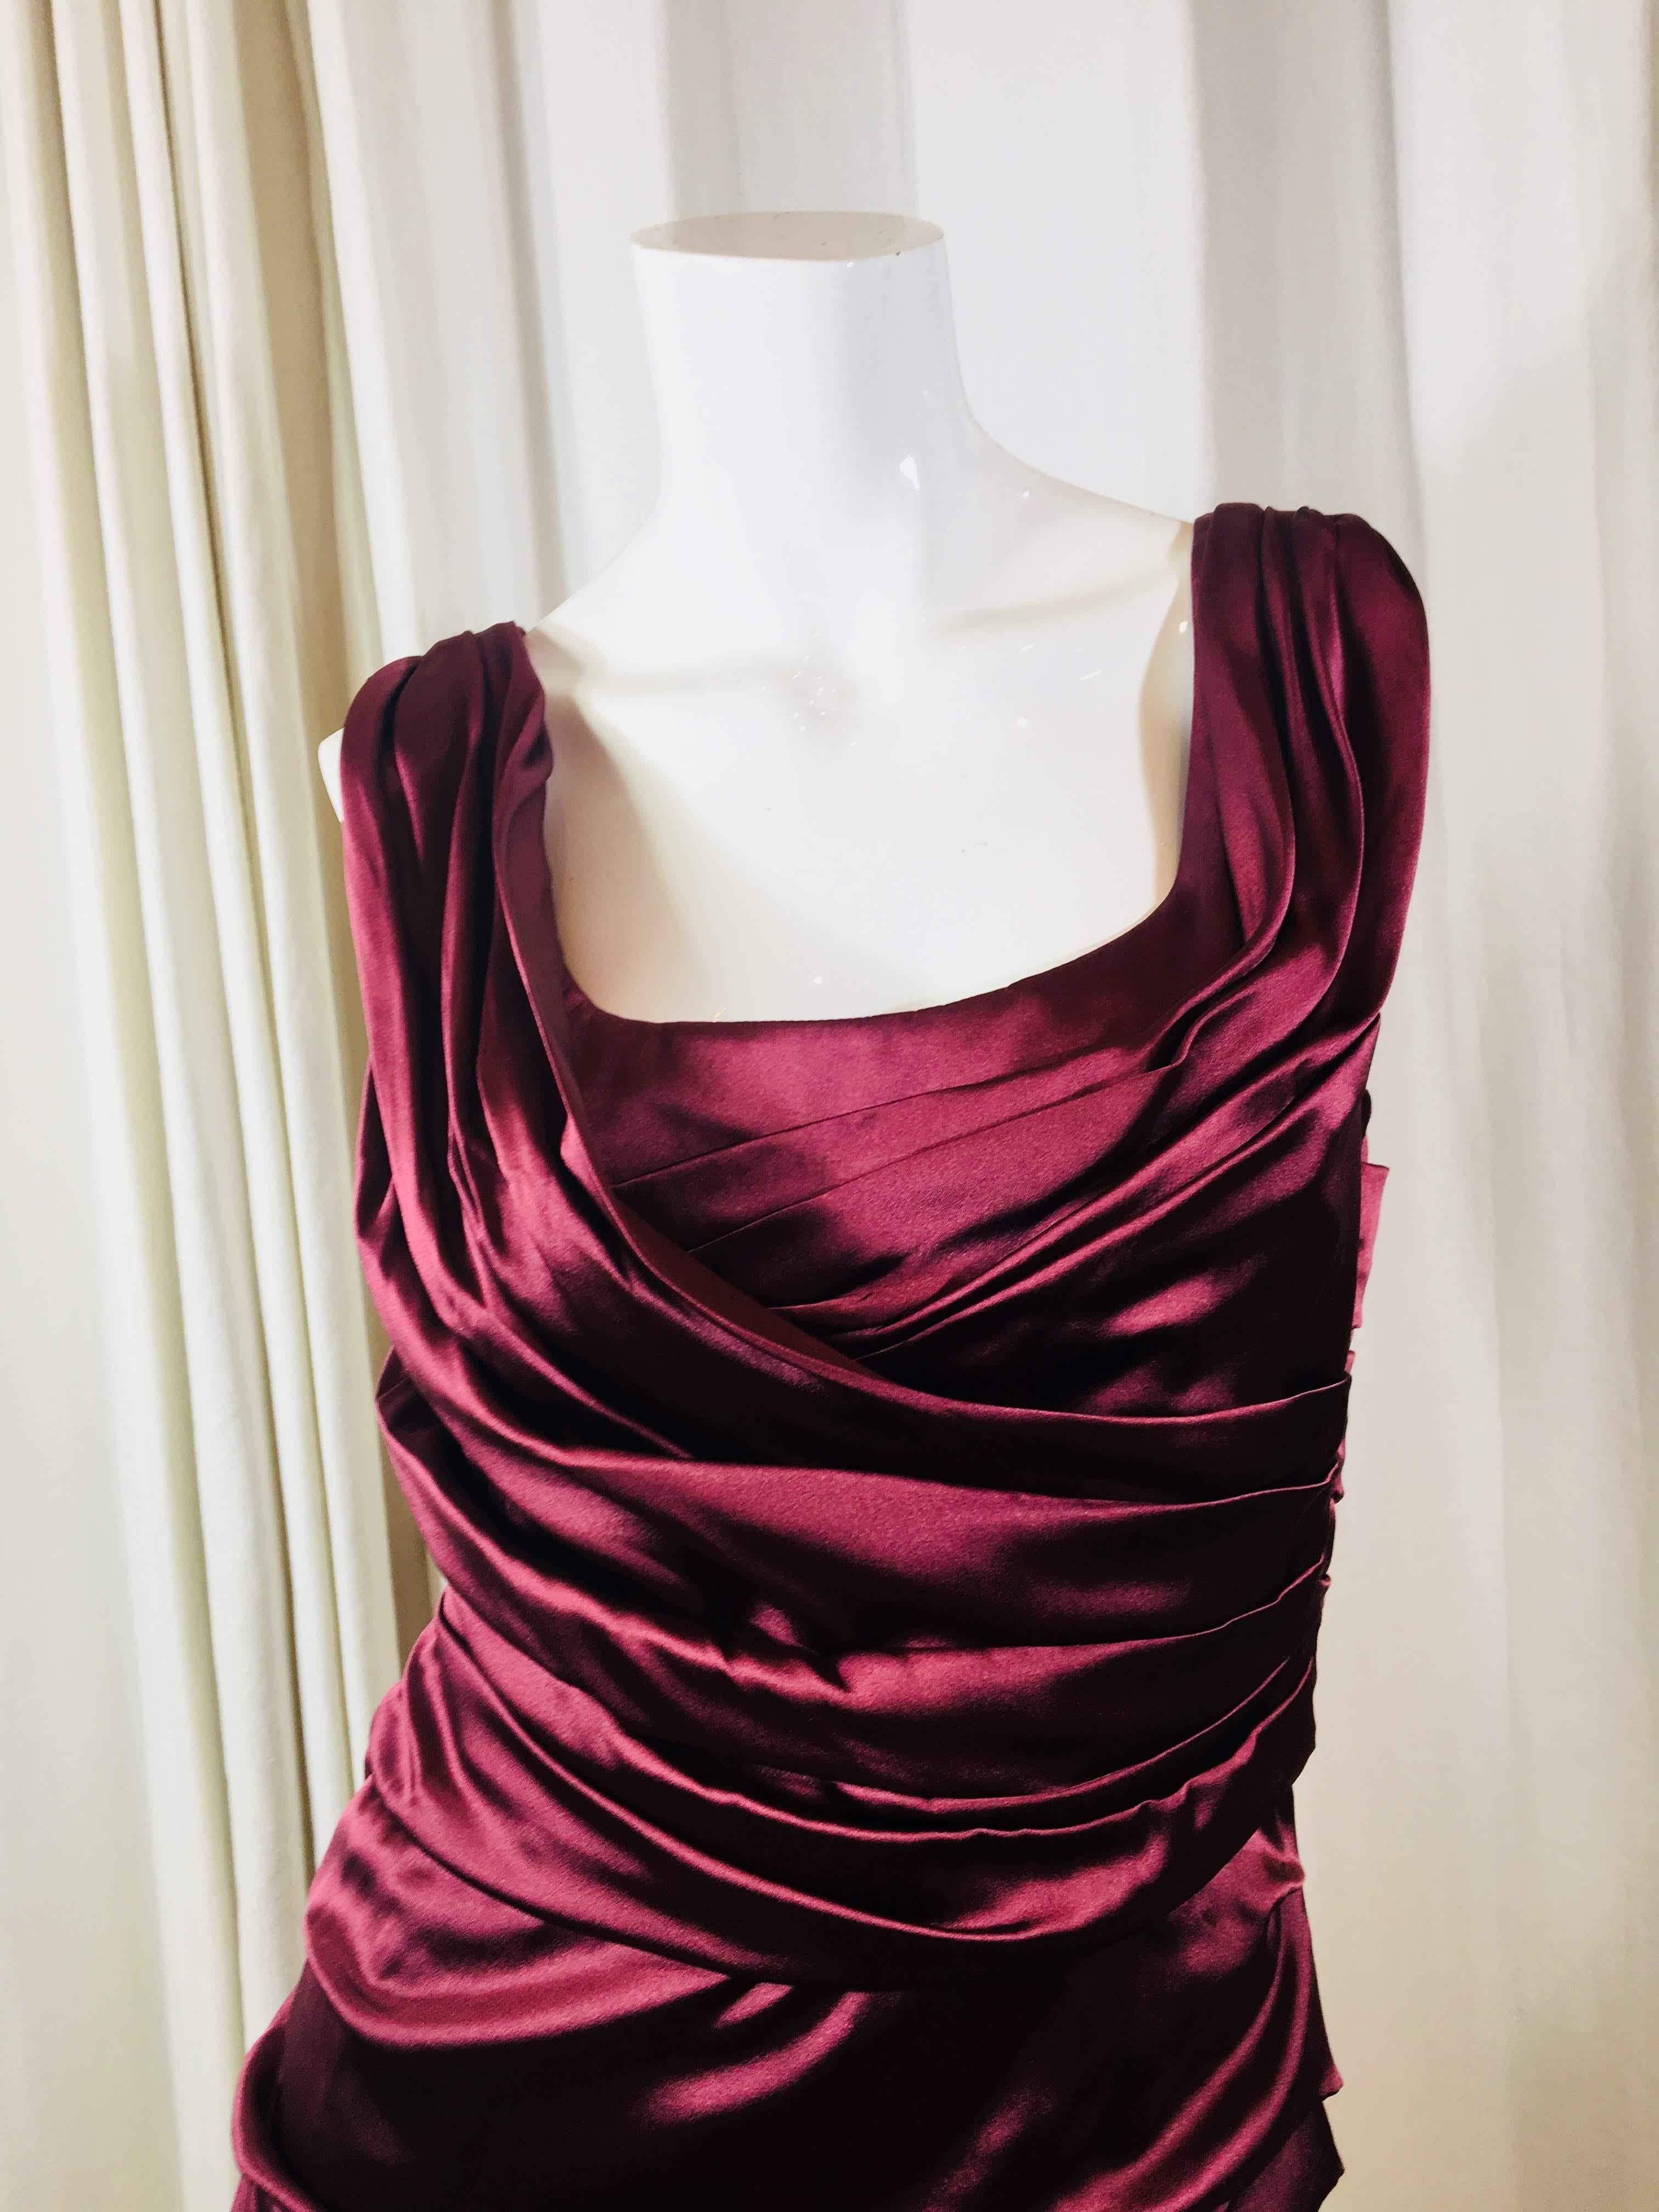 Dolce & Gabbana Fitted Tank Sheath Dress with All-Over Ruching, Pleated Cross Over Square Neckline, Plum Silk in size IT 44.